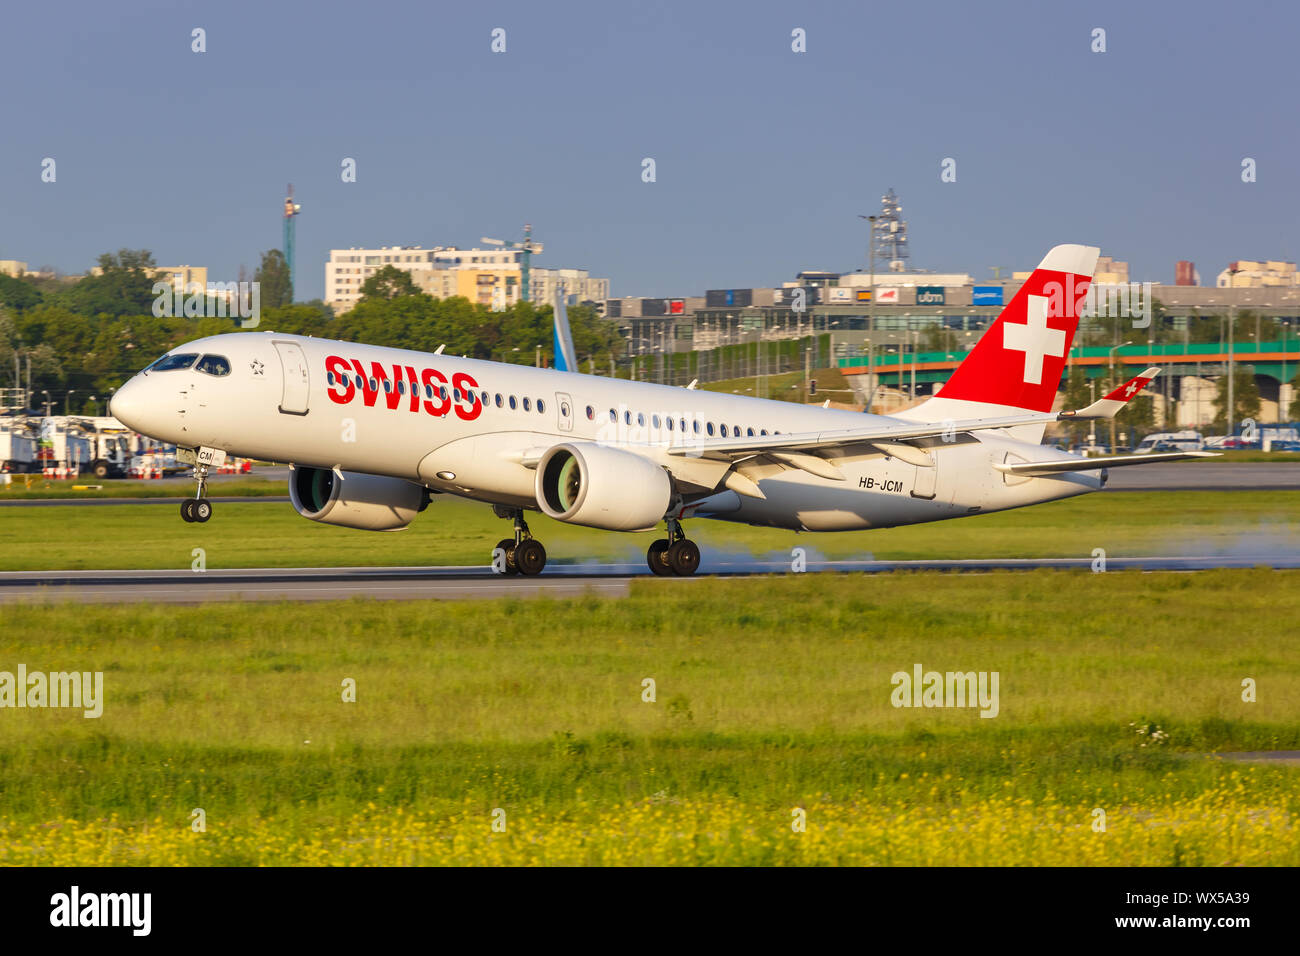 Warsaw, Poland – May 26, 2019: Swiss Airbus A220 CSeries airplane at Warsaw airport (WAW) in Poland. Stock Photo